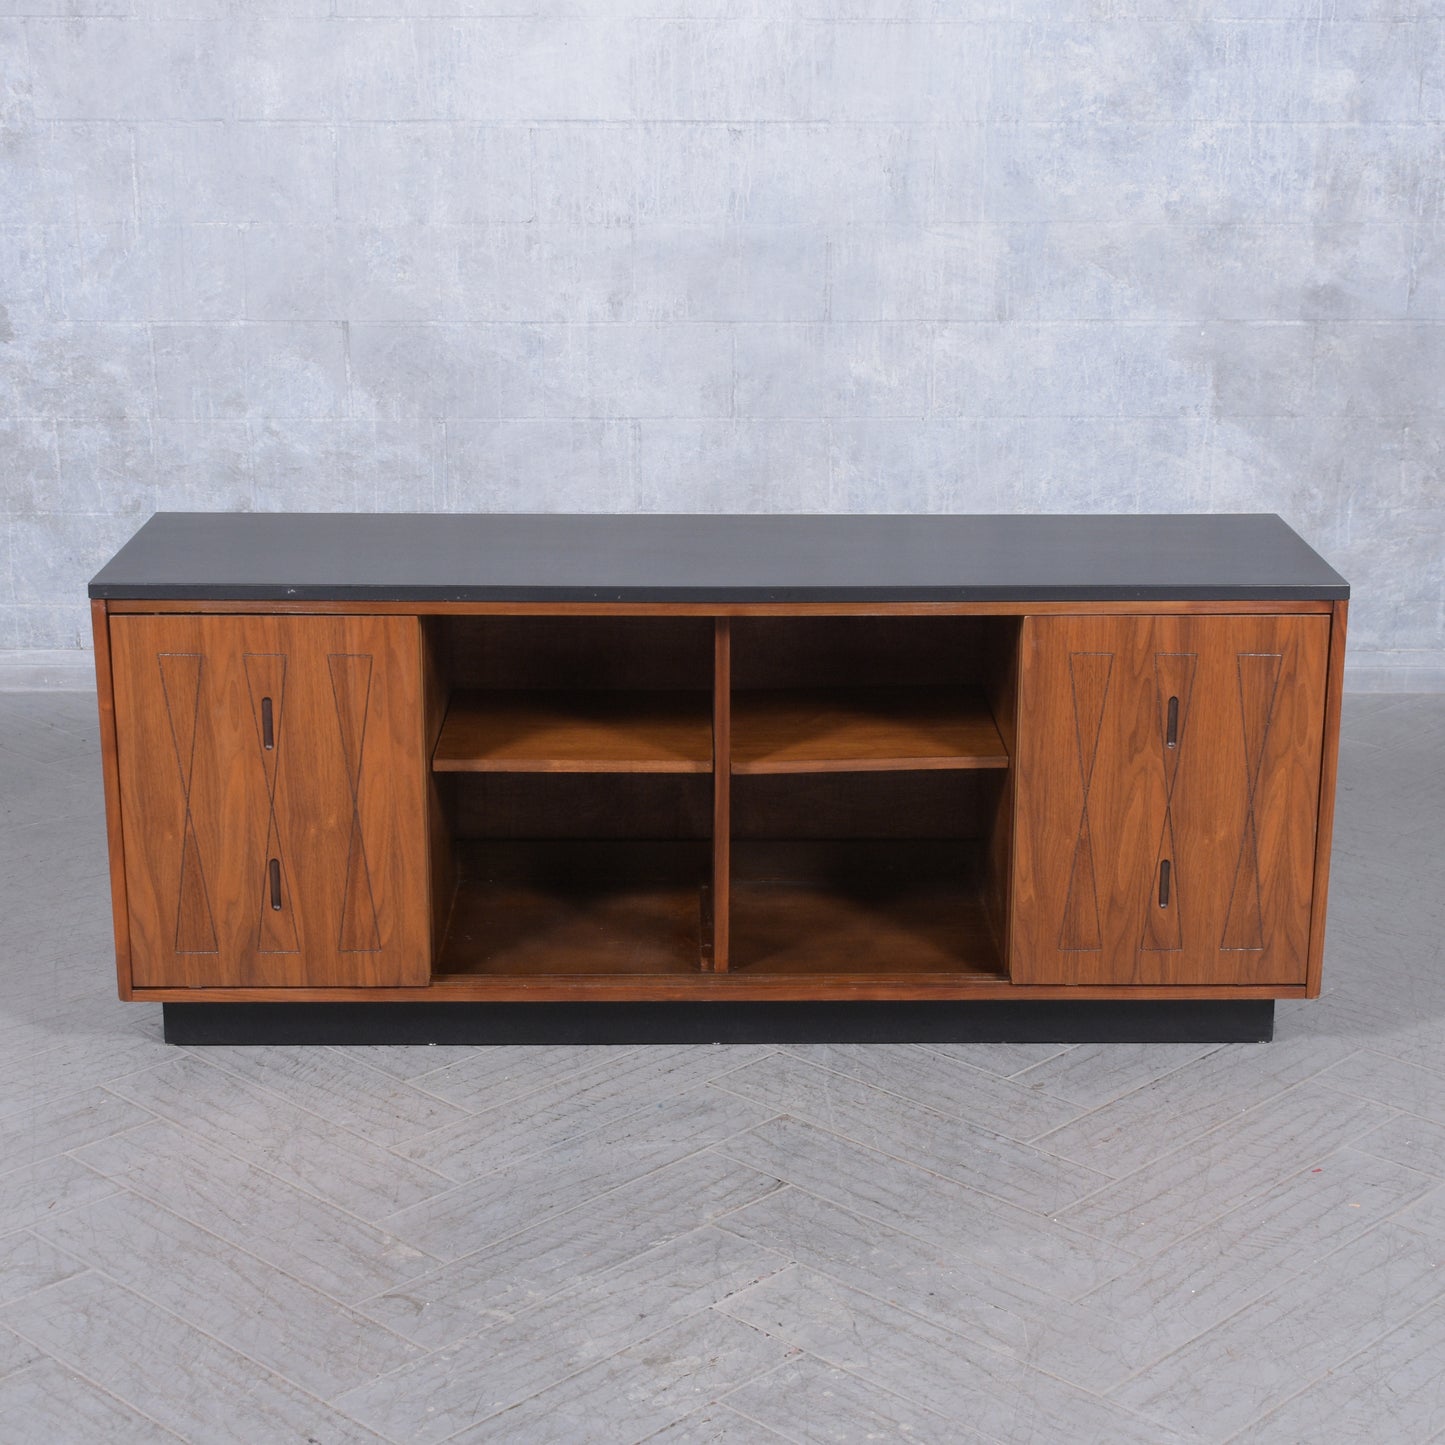 1960s Restored Mid-Century Walnut Credenza with Sliding Doors and Shelves